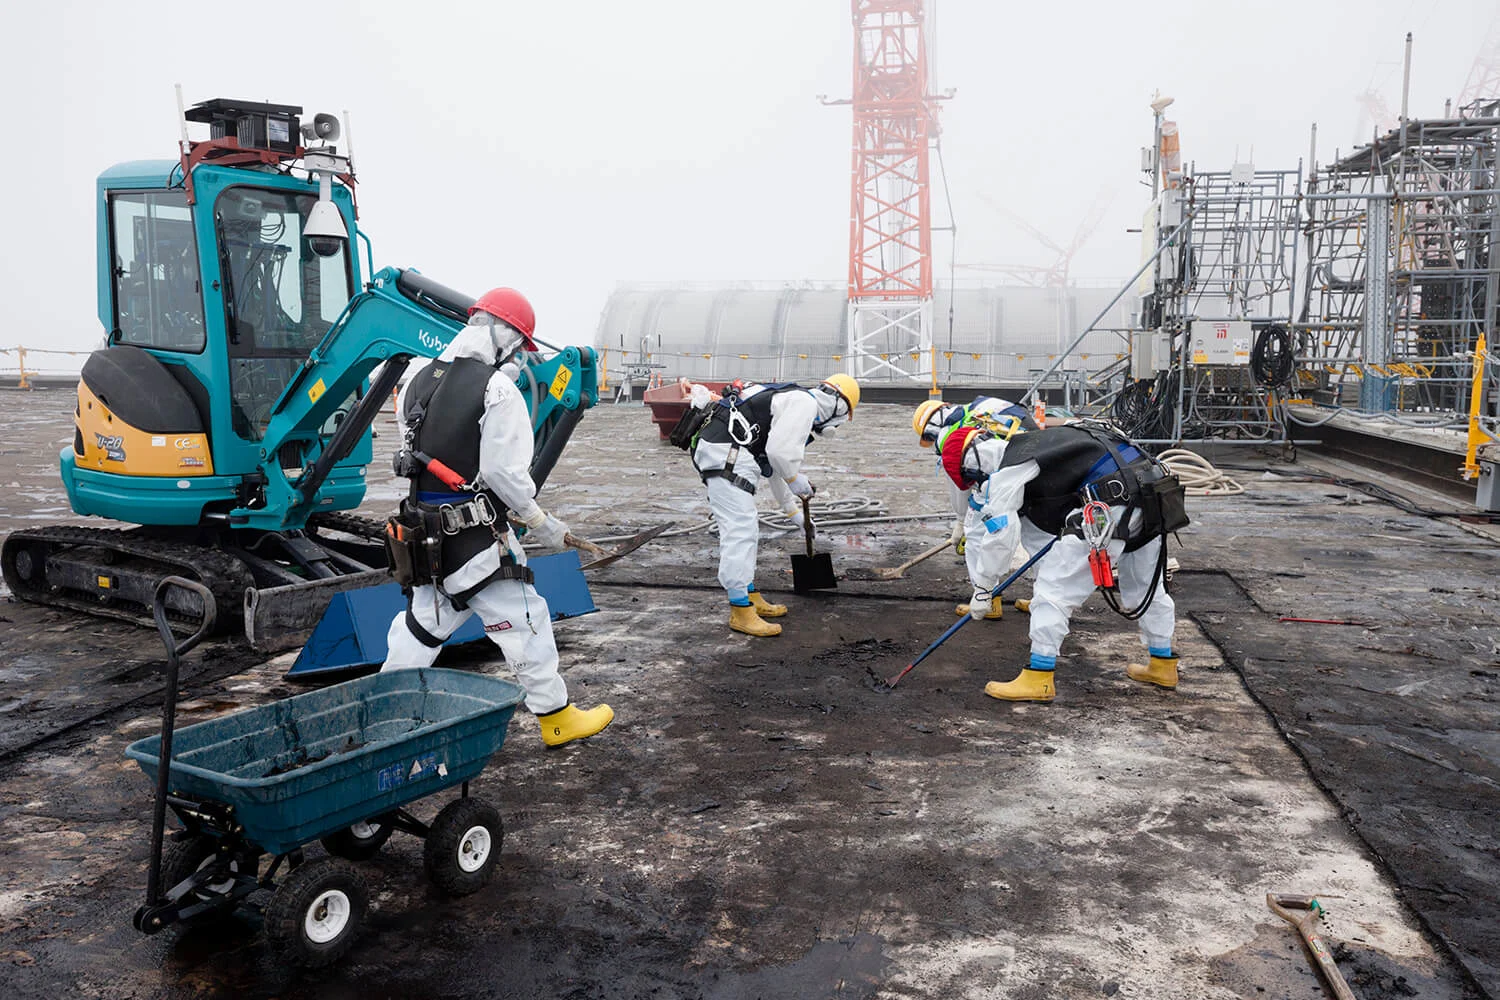 Workers on the rooftop prep for the dismantling of the unit. Removal of spent nuclear fuel starts after dismantling the top-half of Unit 2. Due to high radiation levels around the unit, manual work and remote work (using the robot) were done separately.